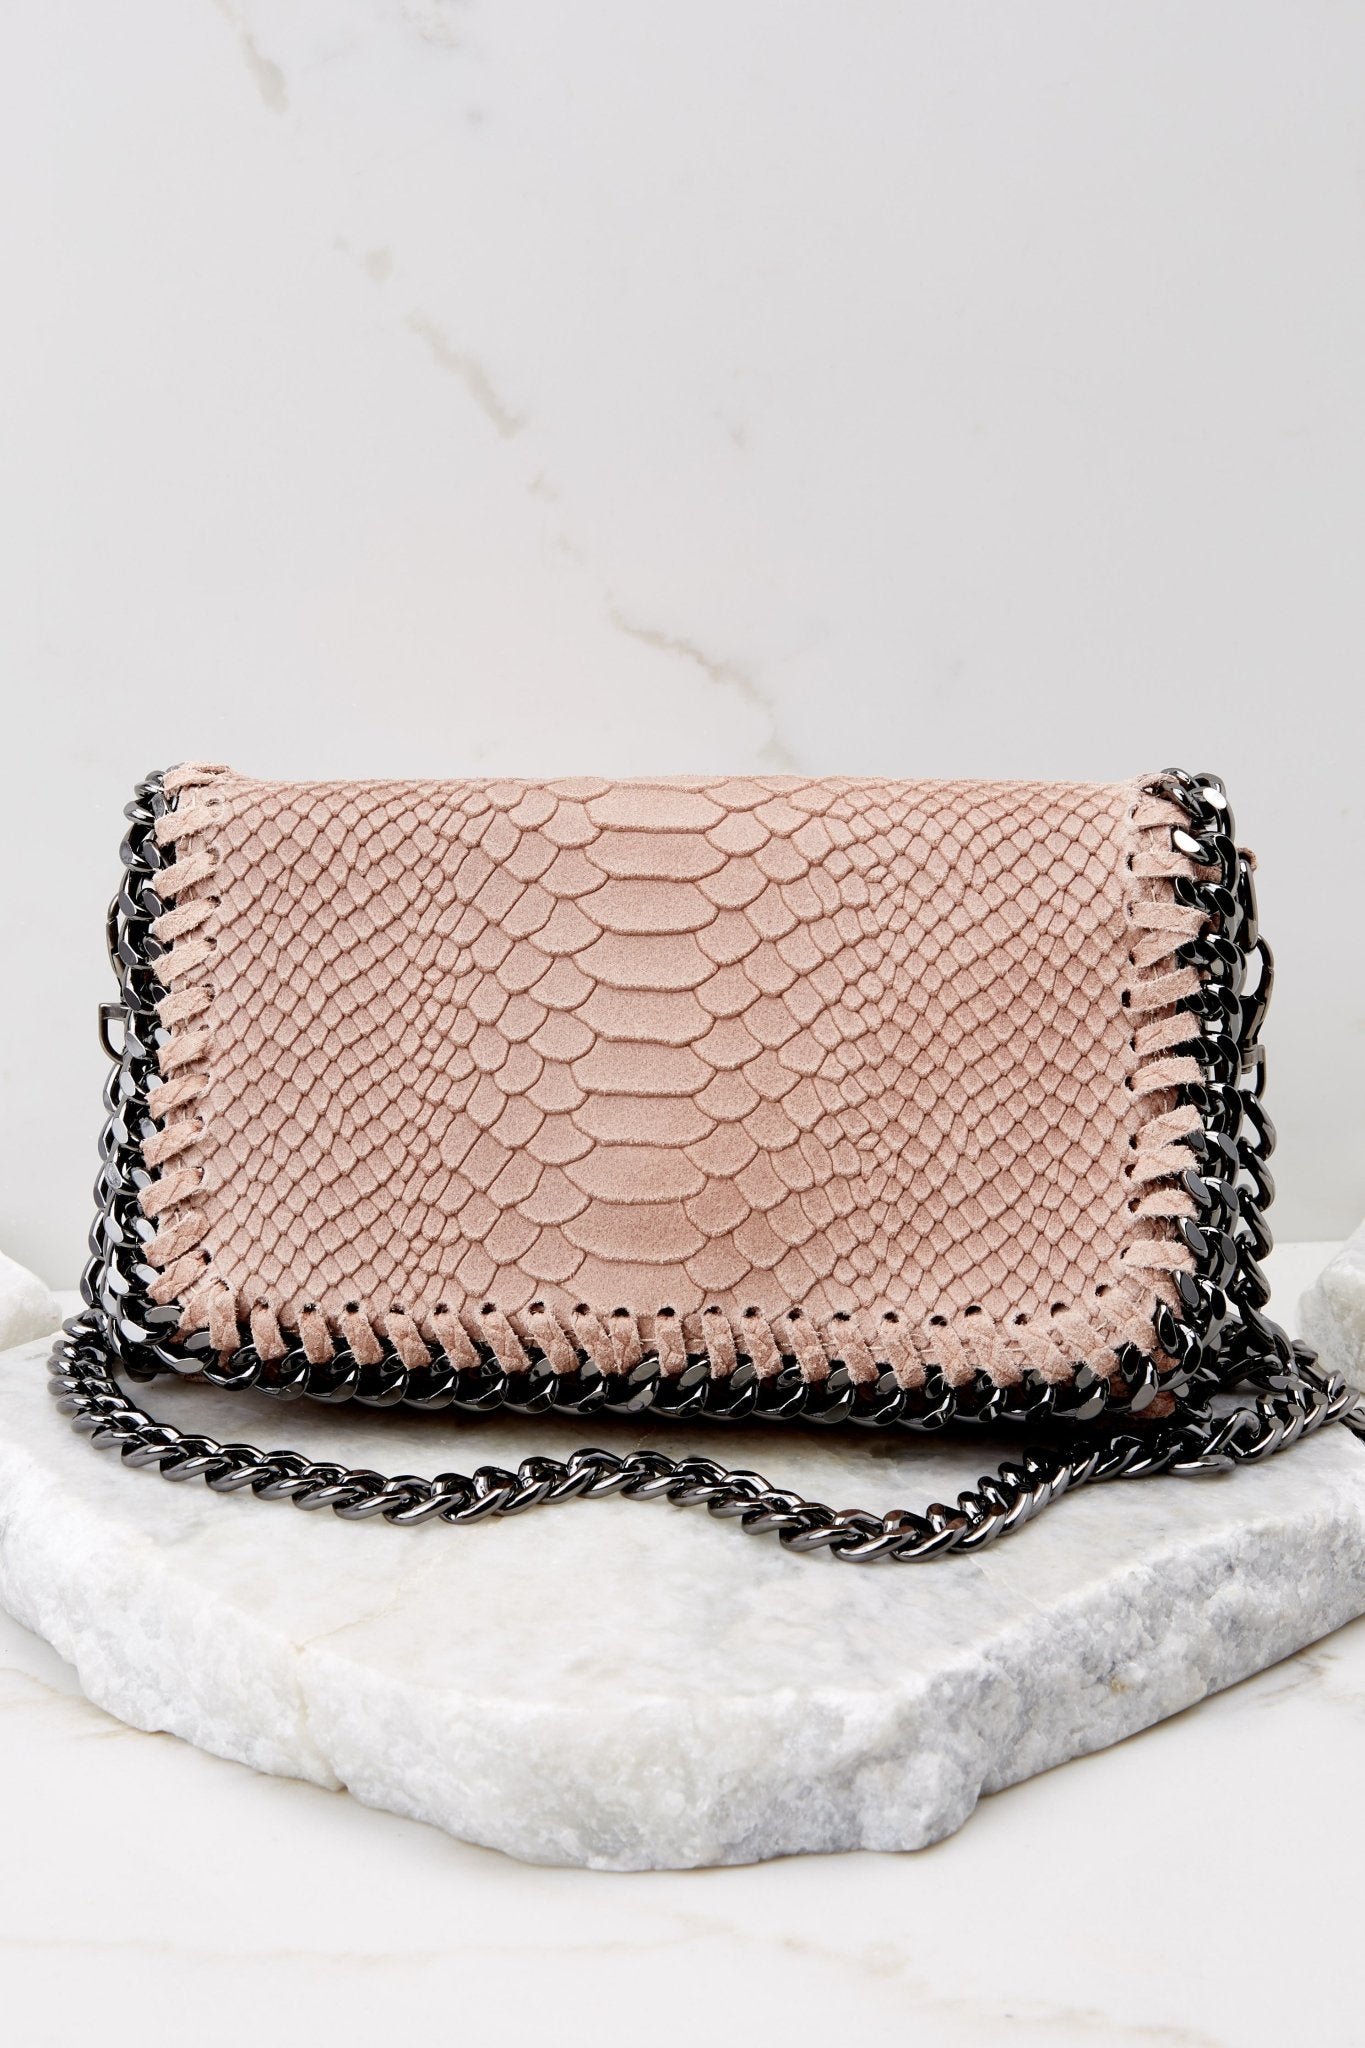 This light pink bag features faux snakeskin, a front flap opening with a silver metal magnetic closure, and a chain strap.